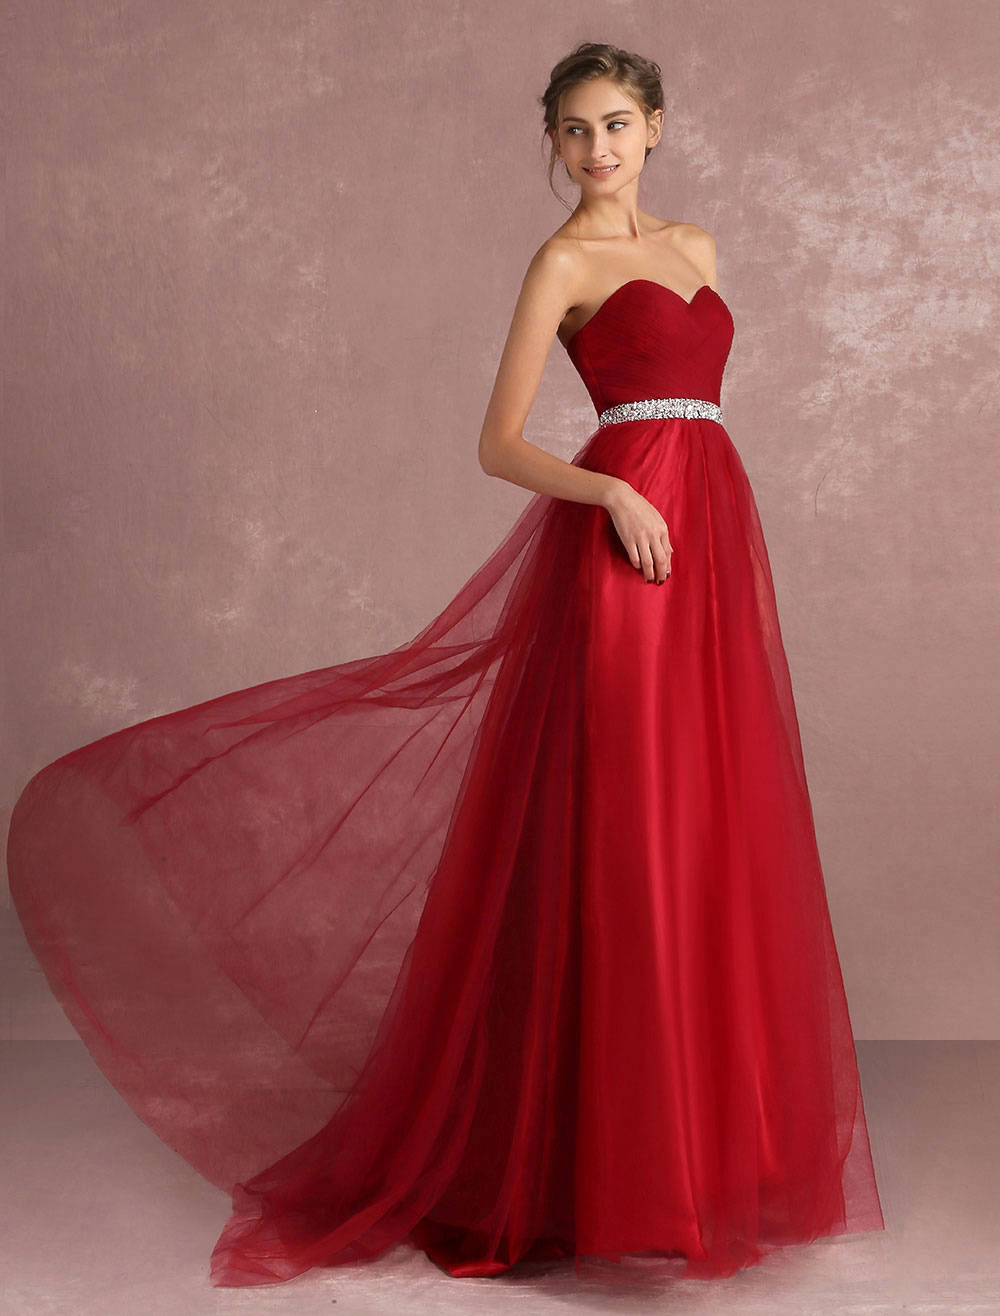 Red Prom Dresses 2021 Long Strapless Backless Tulle Evening Dress ...